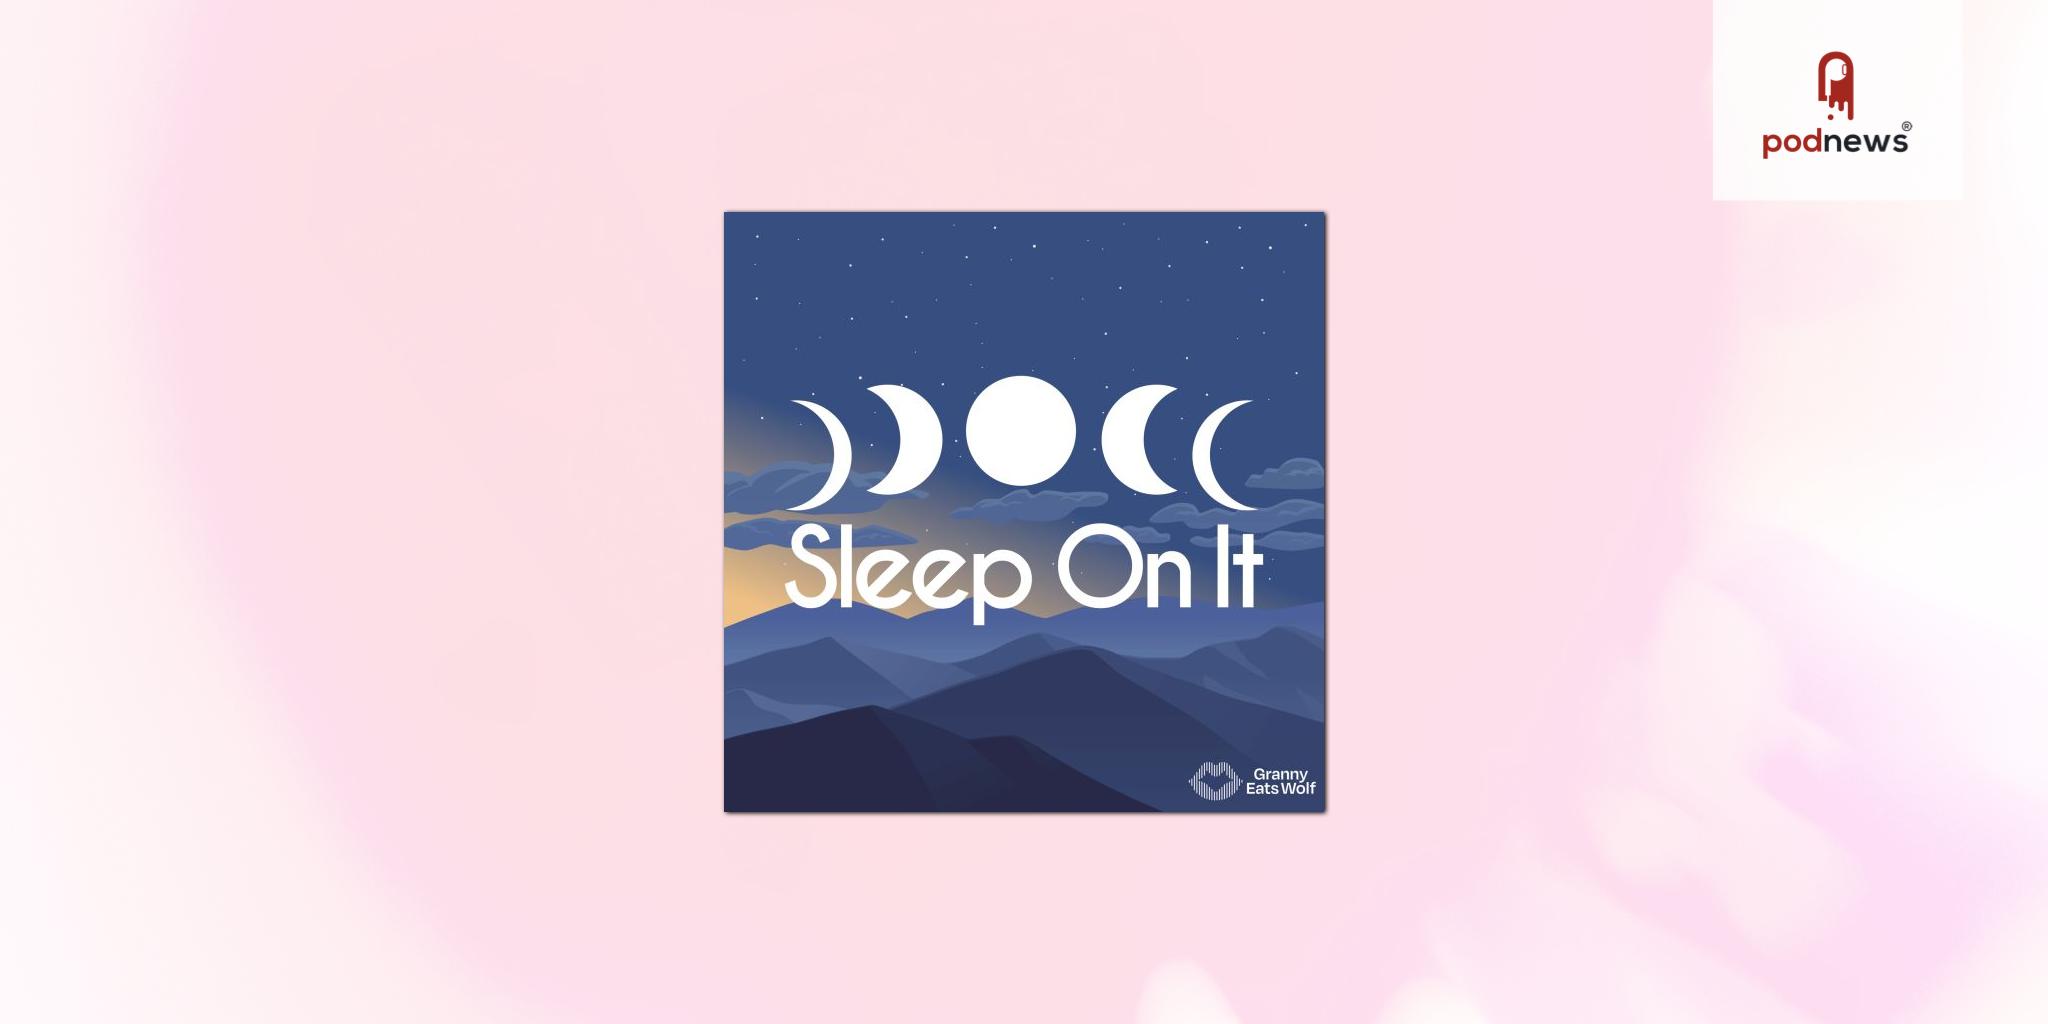 New podcast set to tune people in to a good night’s sleep